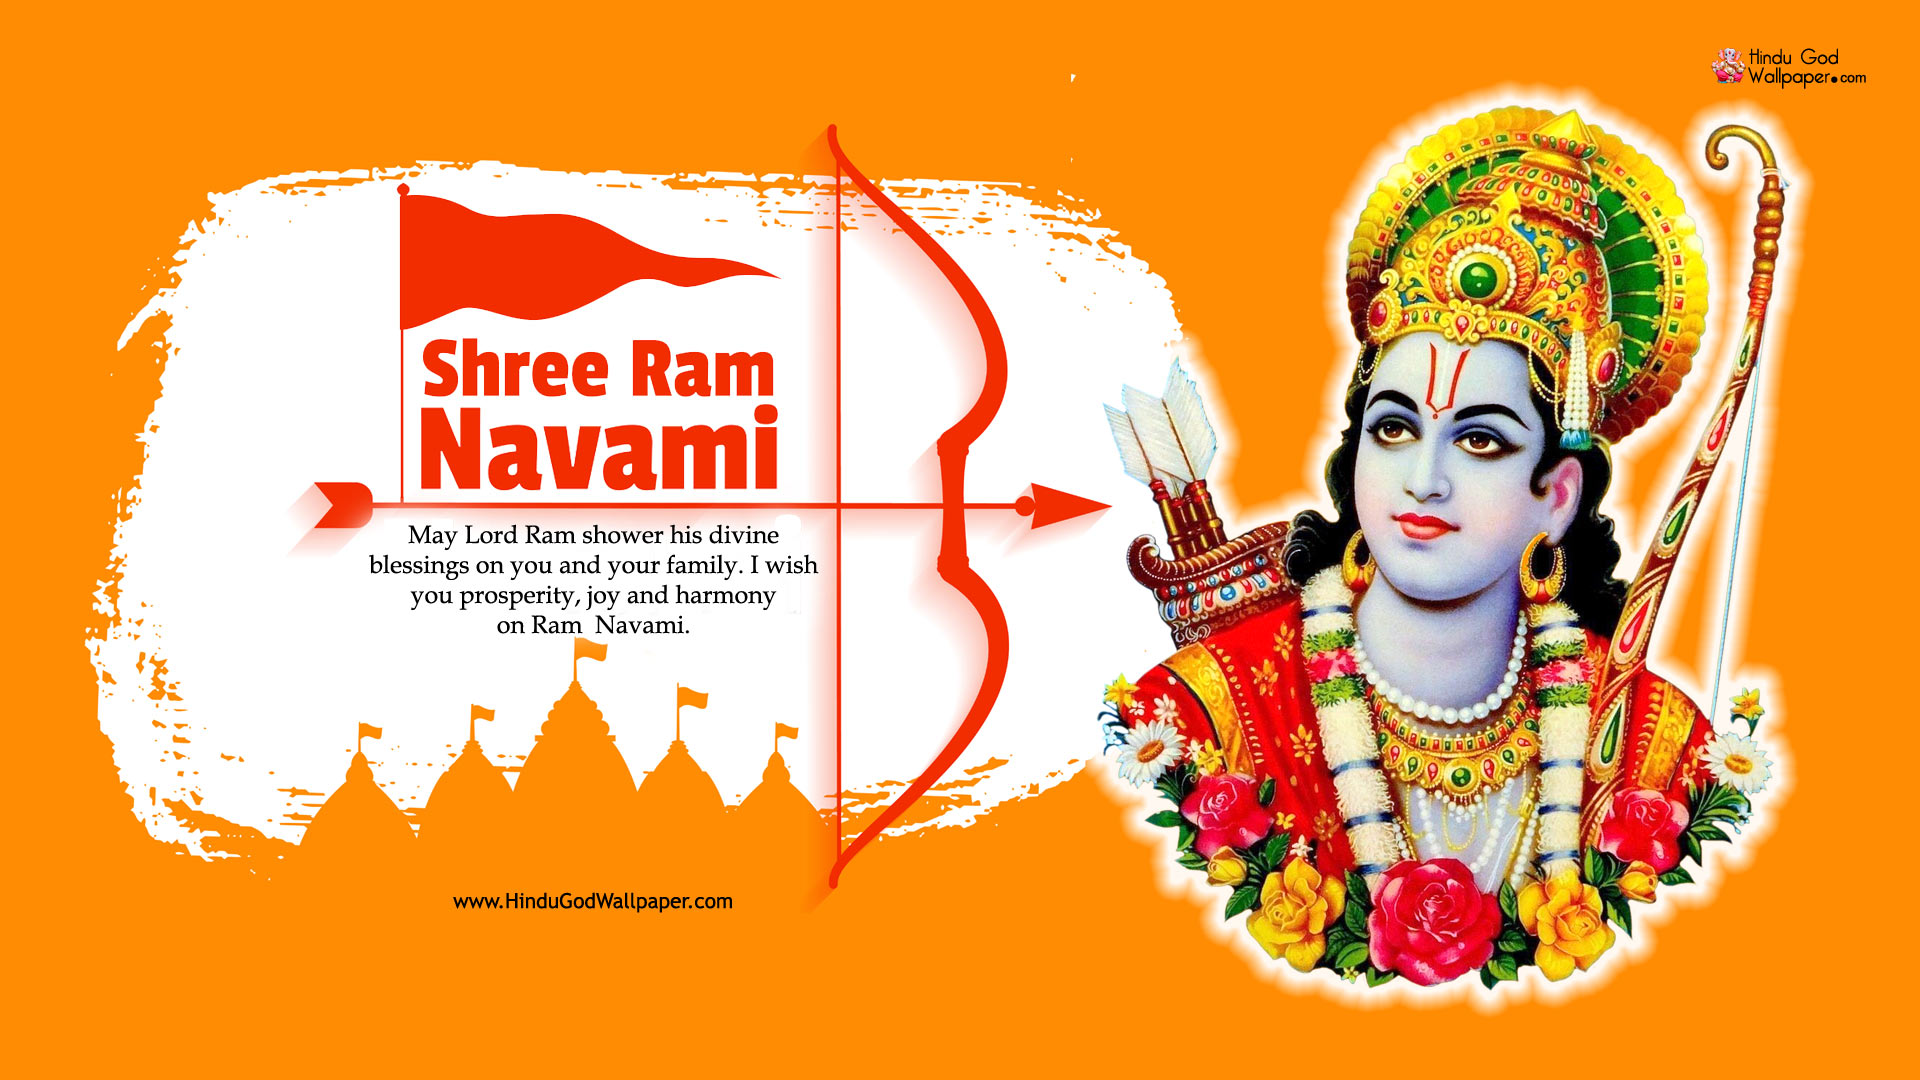 Ram Navami Special Wallpaper HD Wishes Images Free Download